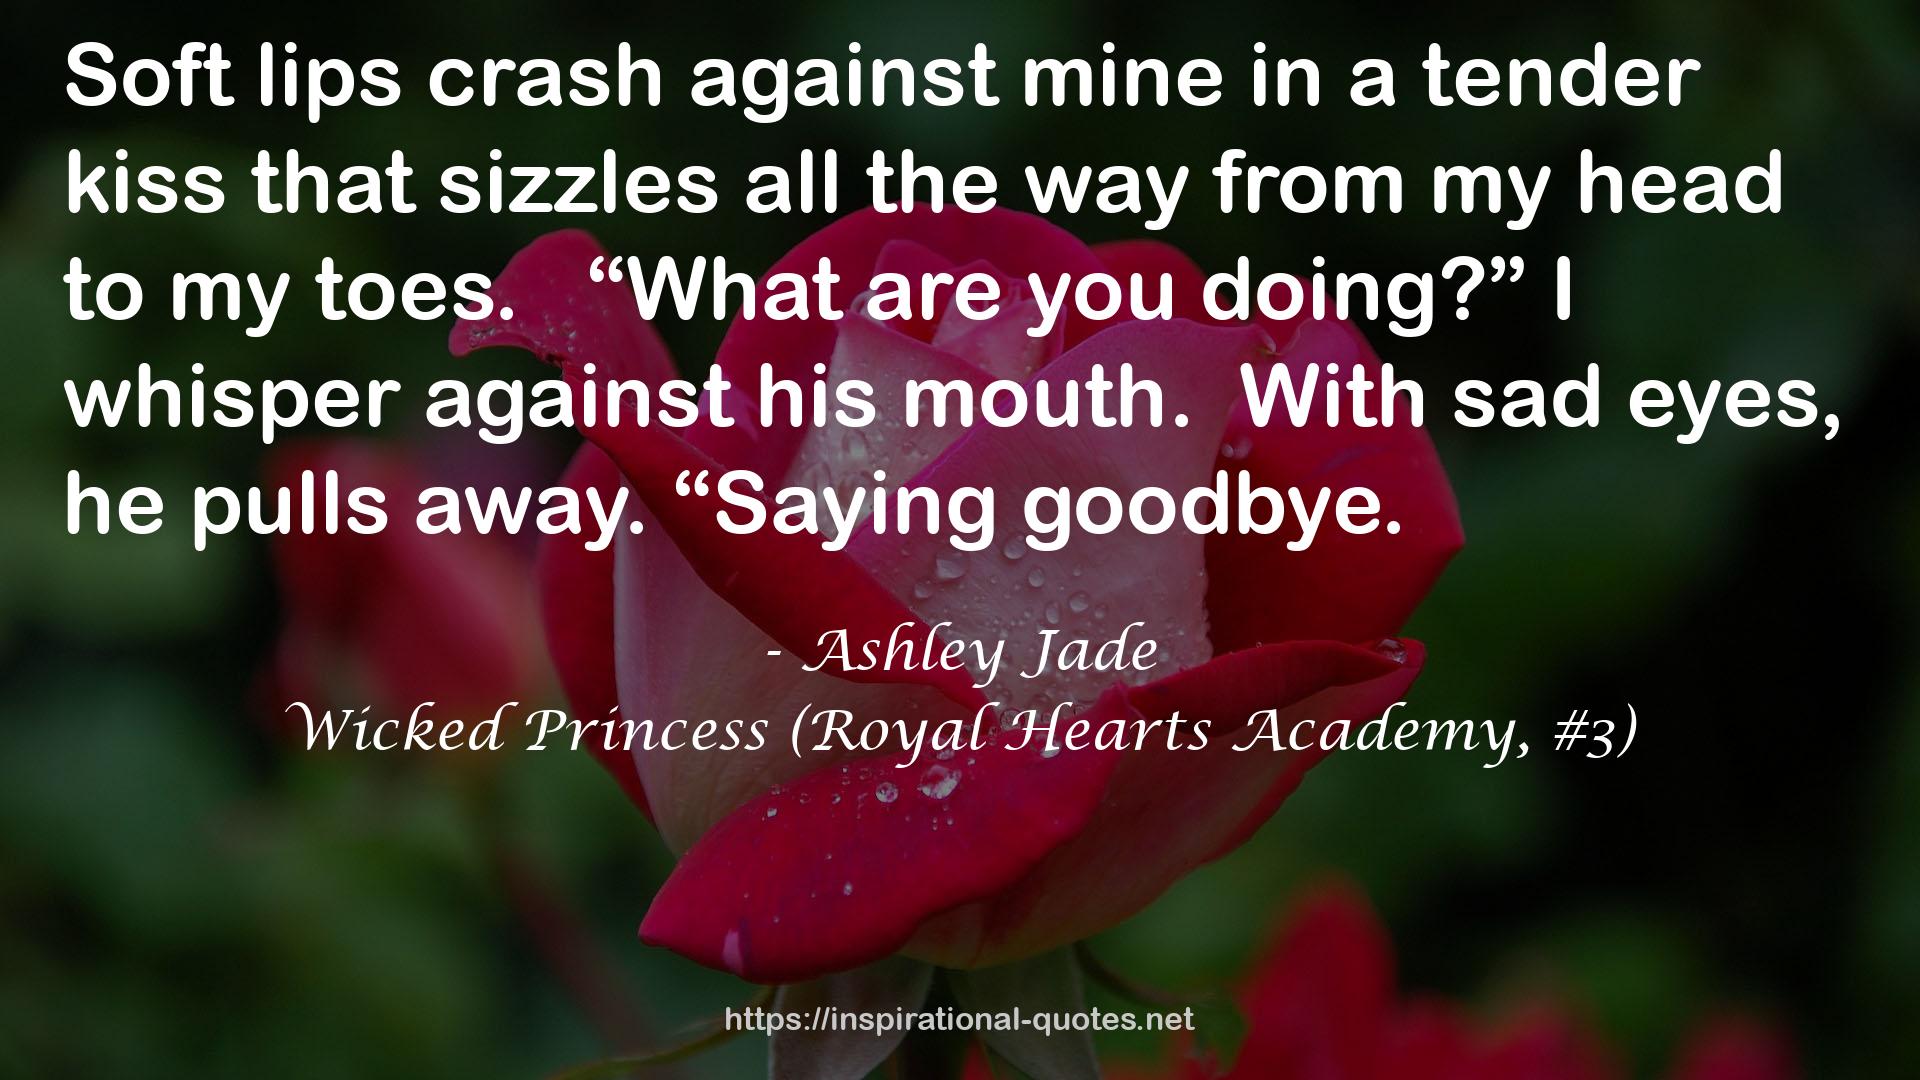 Wicked Princess (Royal Hearts Academy, #3) QUOTES